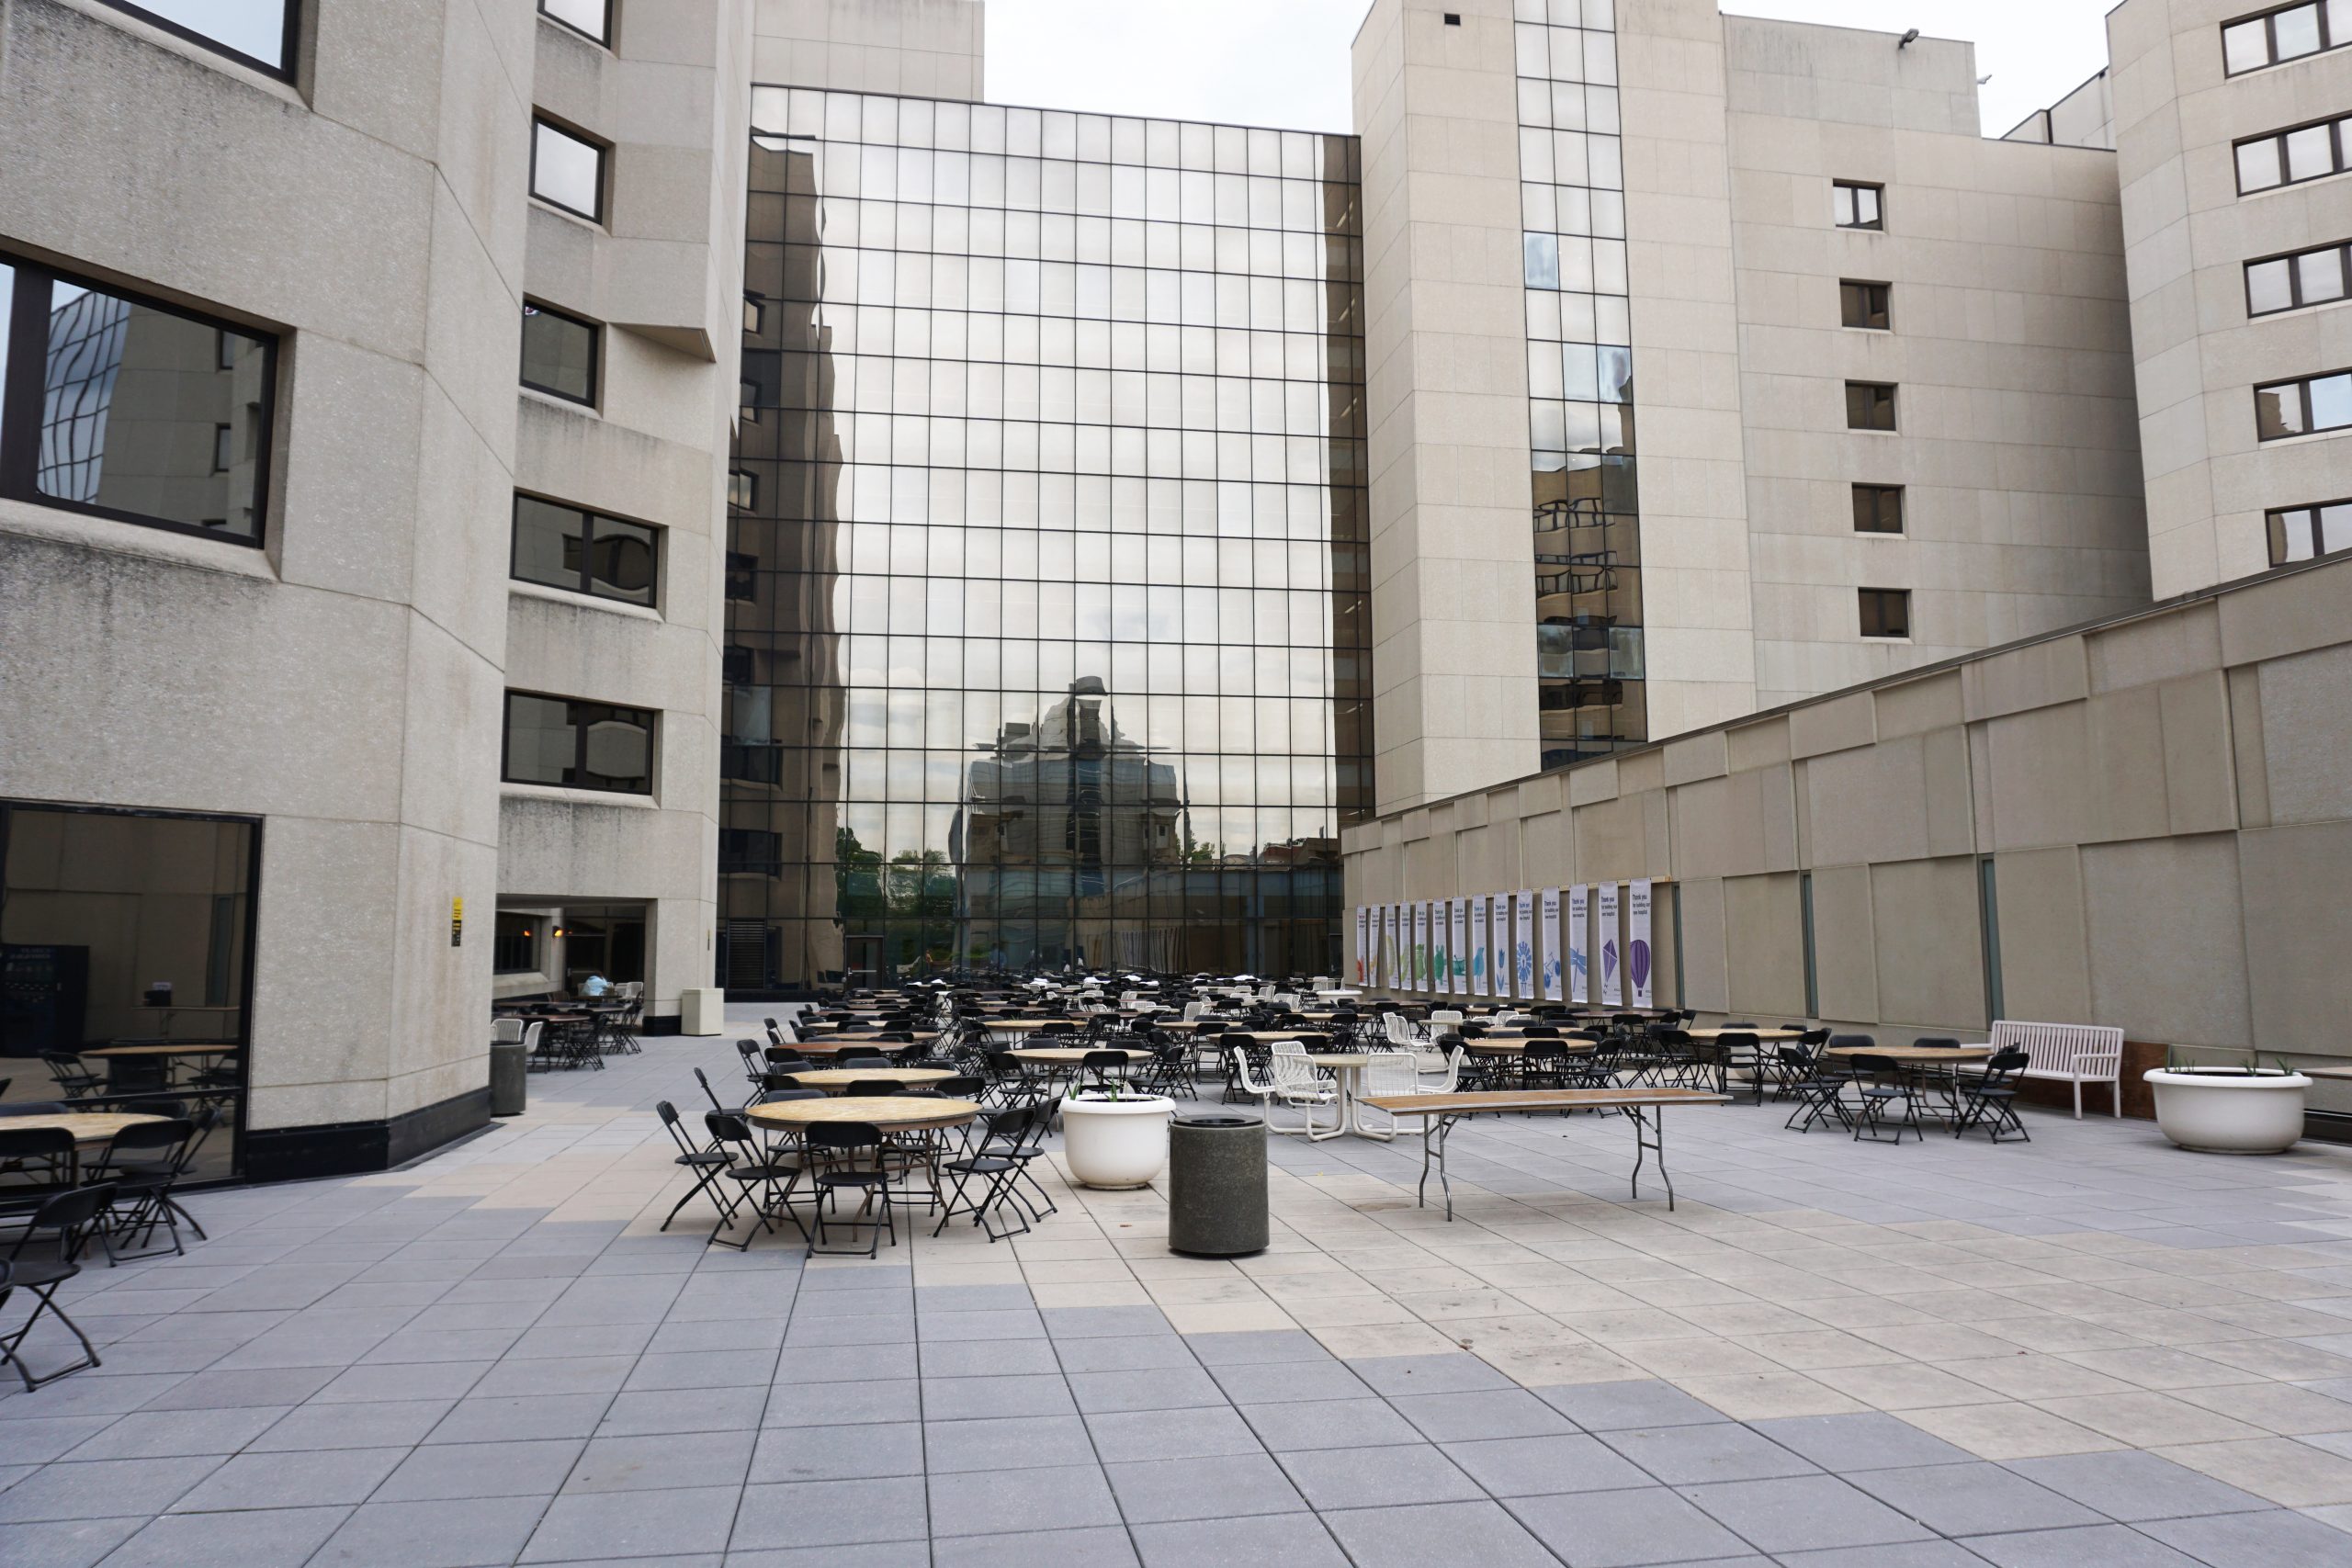 Tables and chairs at University of Iowa Hospitals and Clinics courtyard image from ground